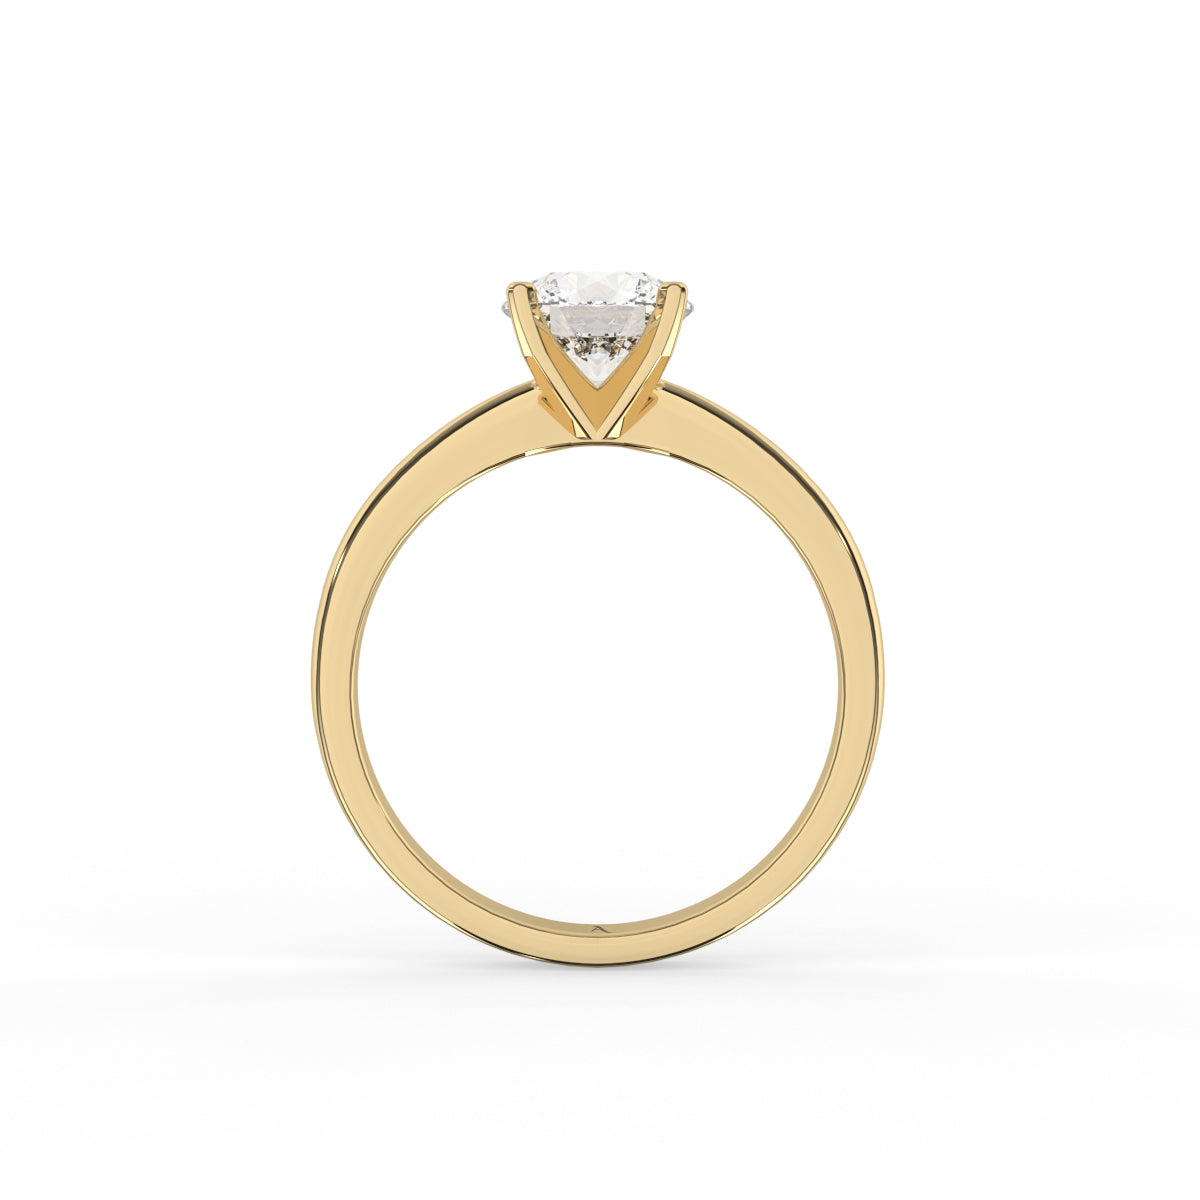 Round solitaire ring